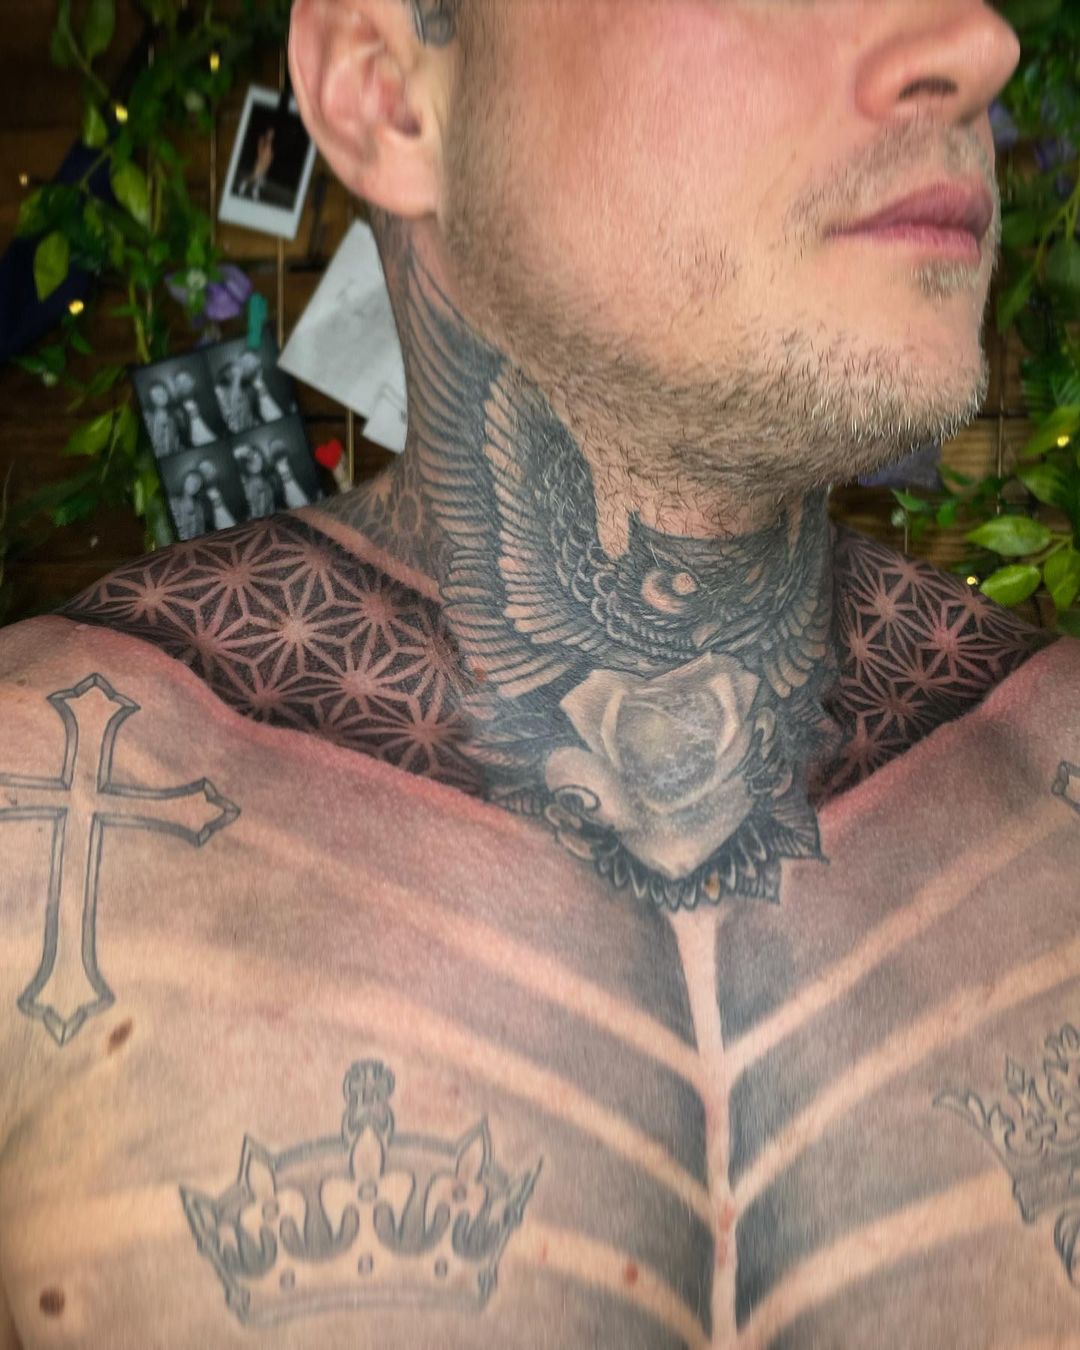 If you like owls this black and white neck tattoo will suit you. It will take you a couple of hours to finish it. Heads up since it is placed on an inconvenient spot.